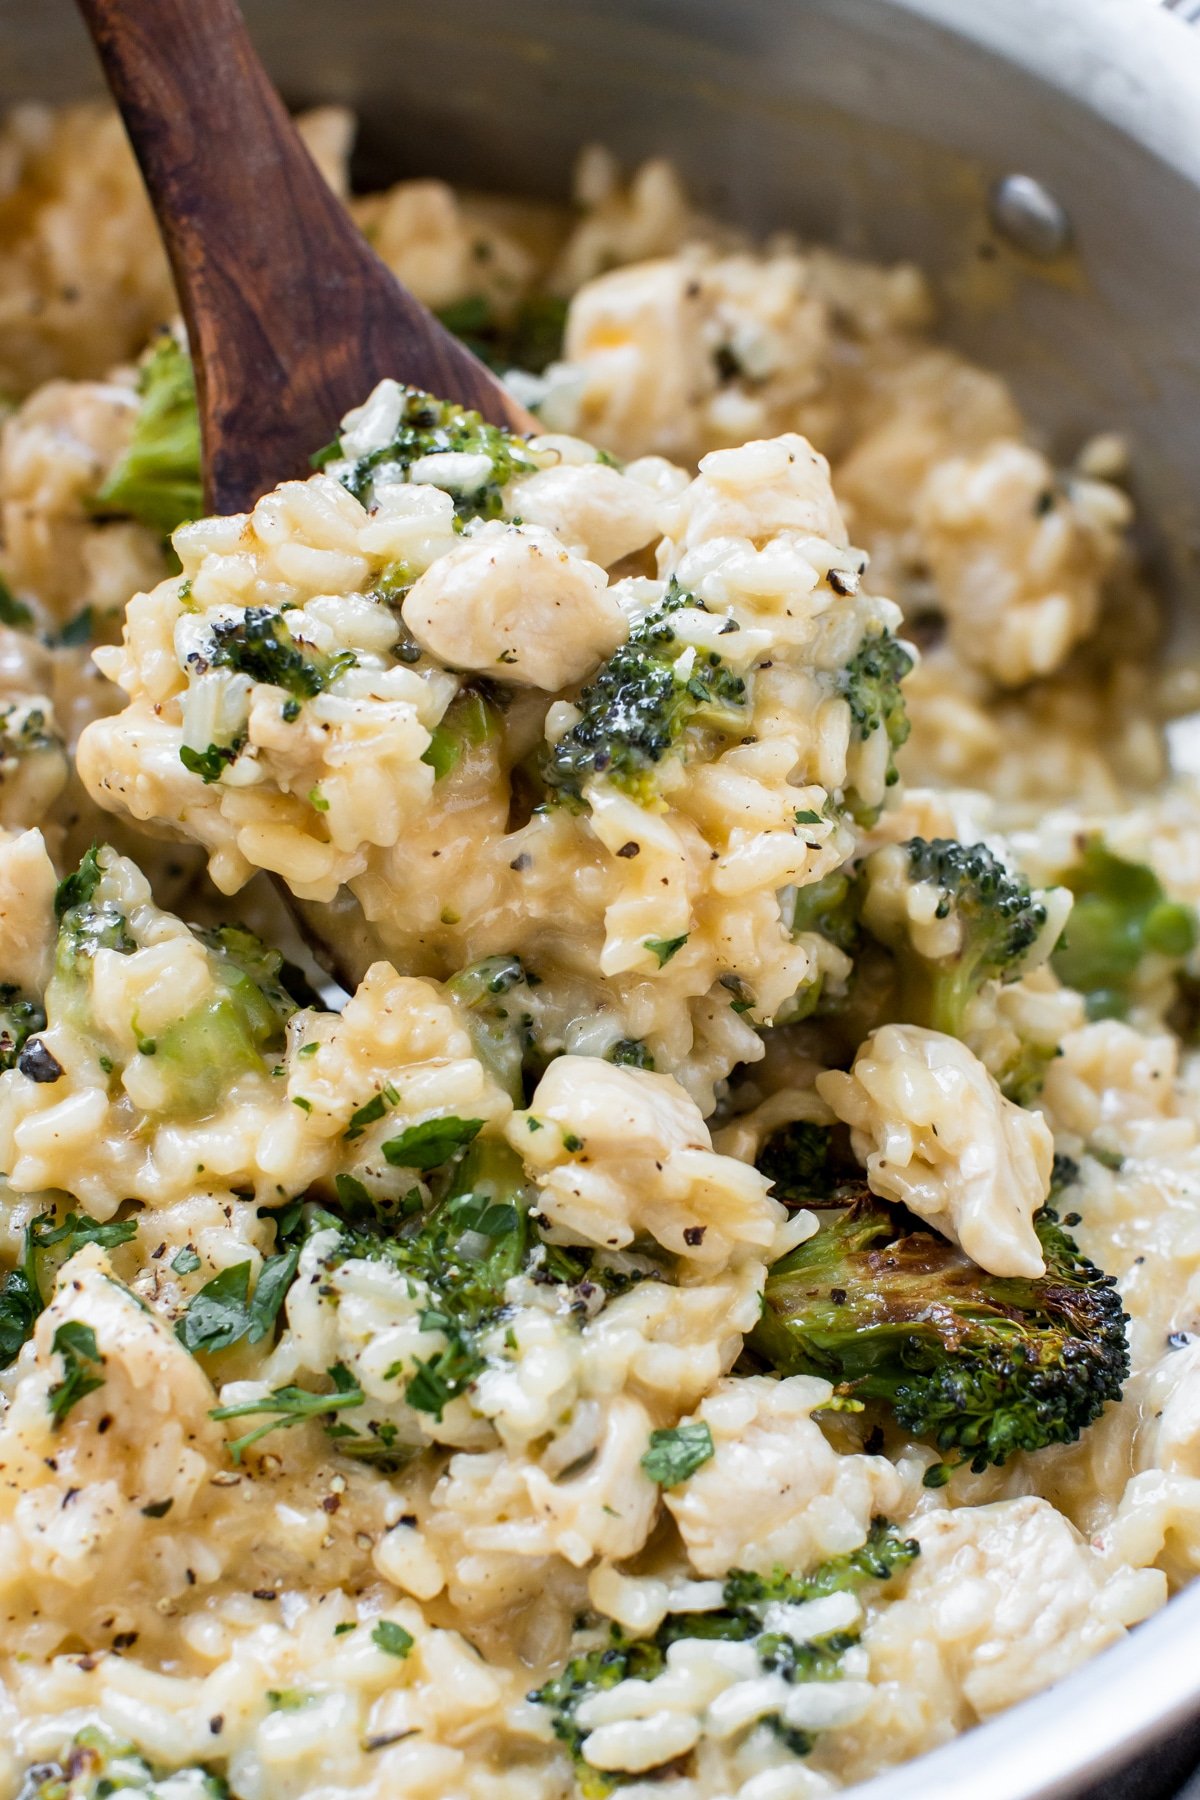 This Is My Absolute Favorite Pan for Better Risotto